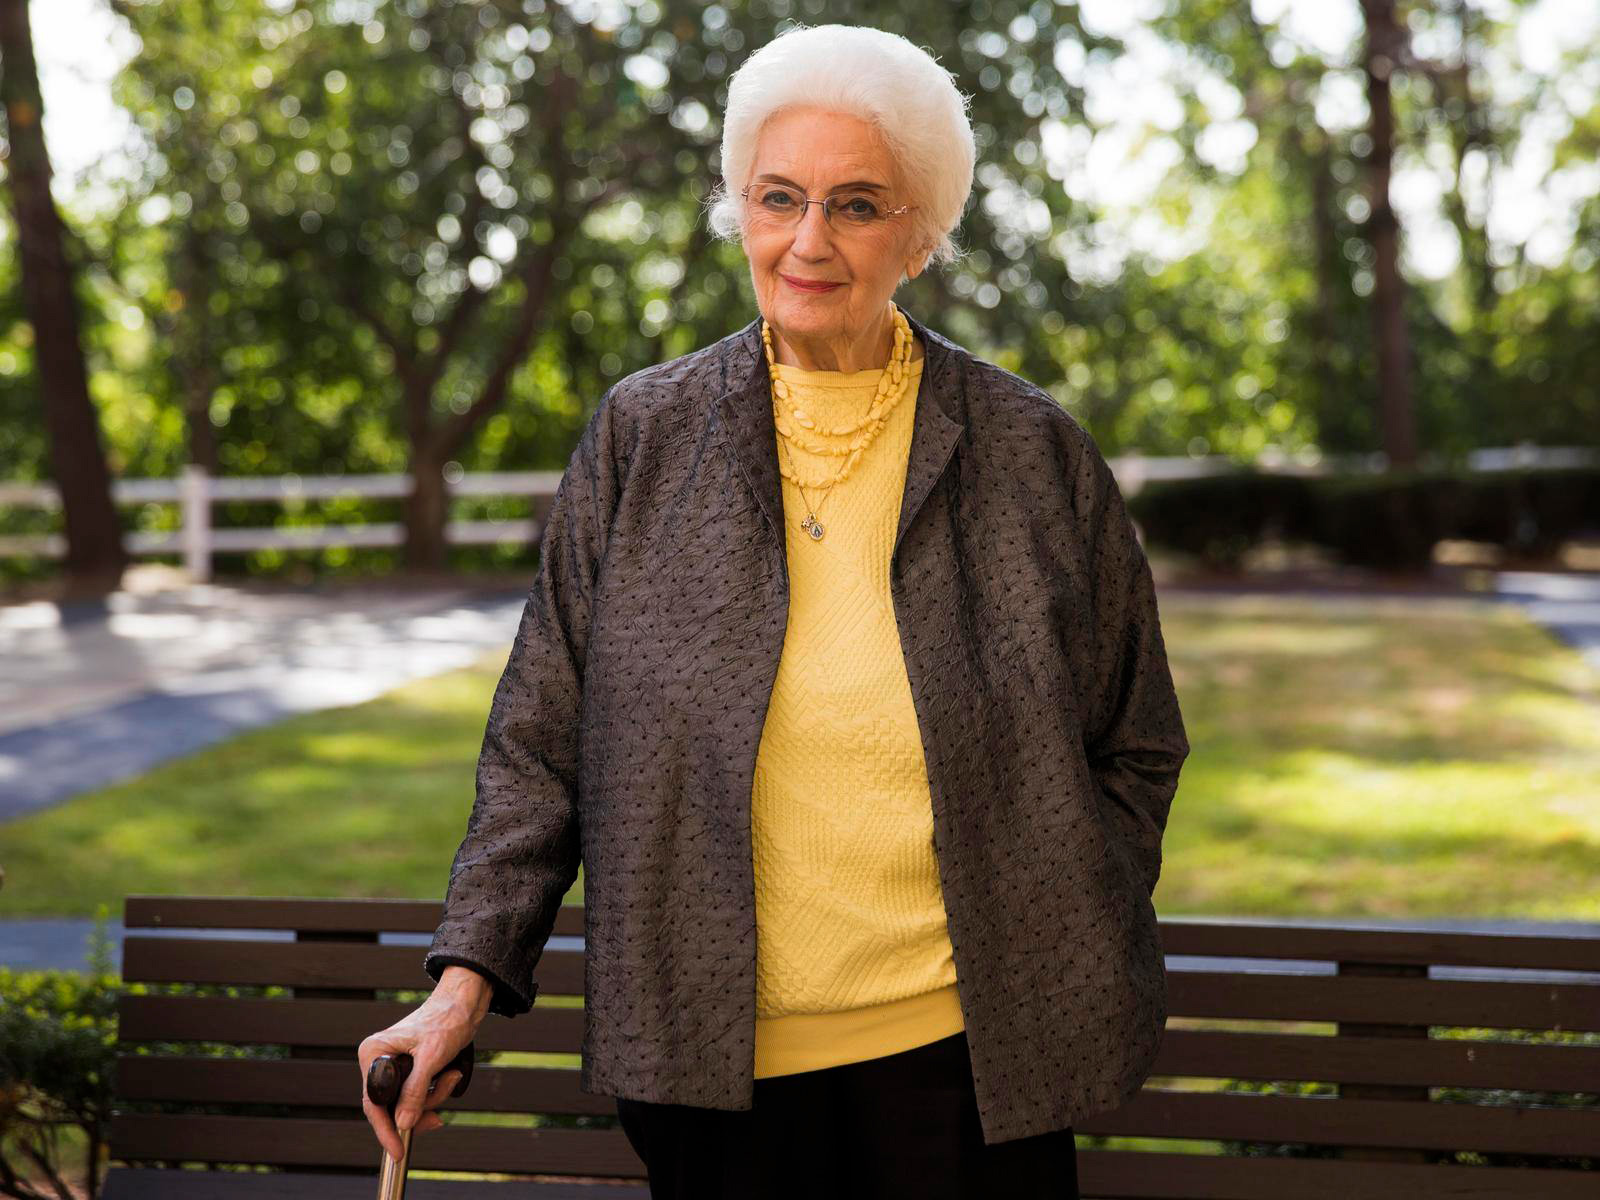 Senior woman enjoying the outdoors standing in front of park bench holding her cane